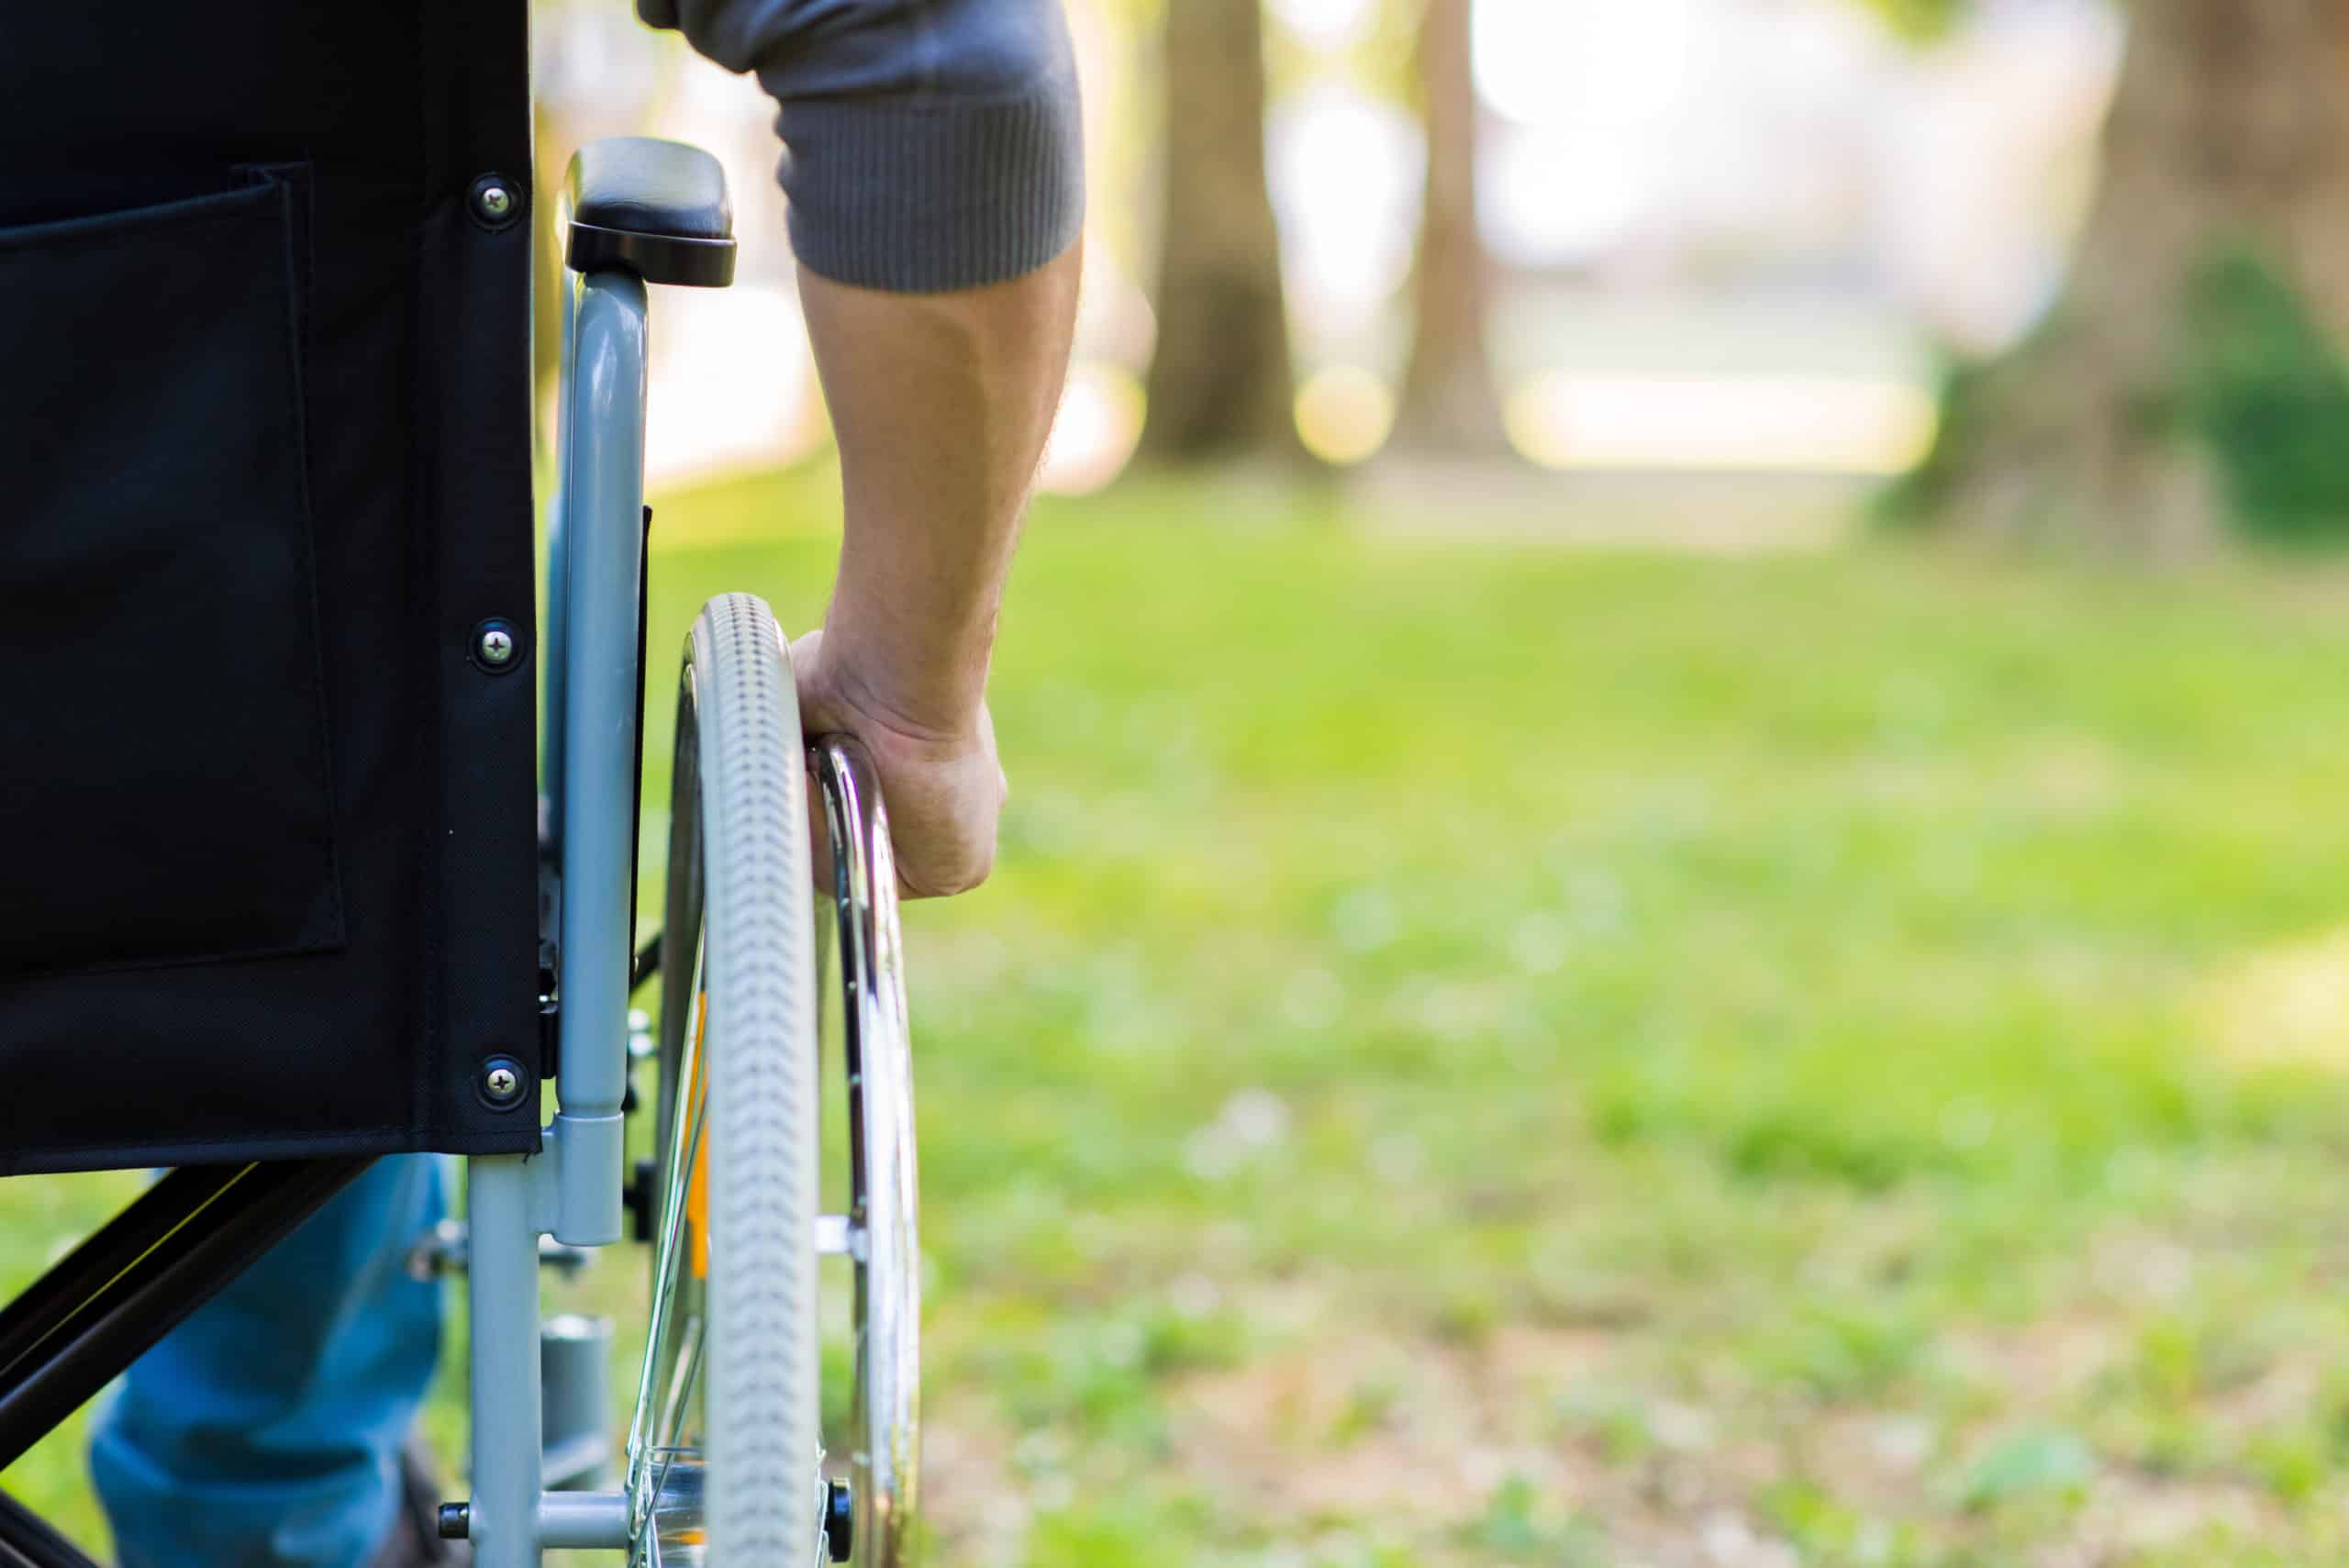 Male hand on wheel of wheelchair during walk in park